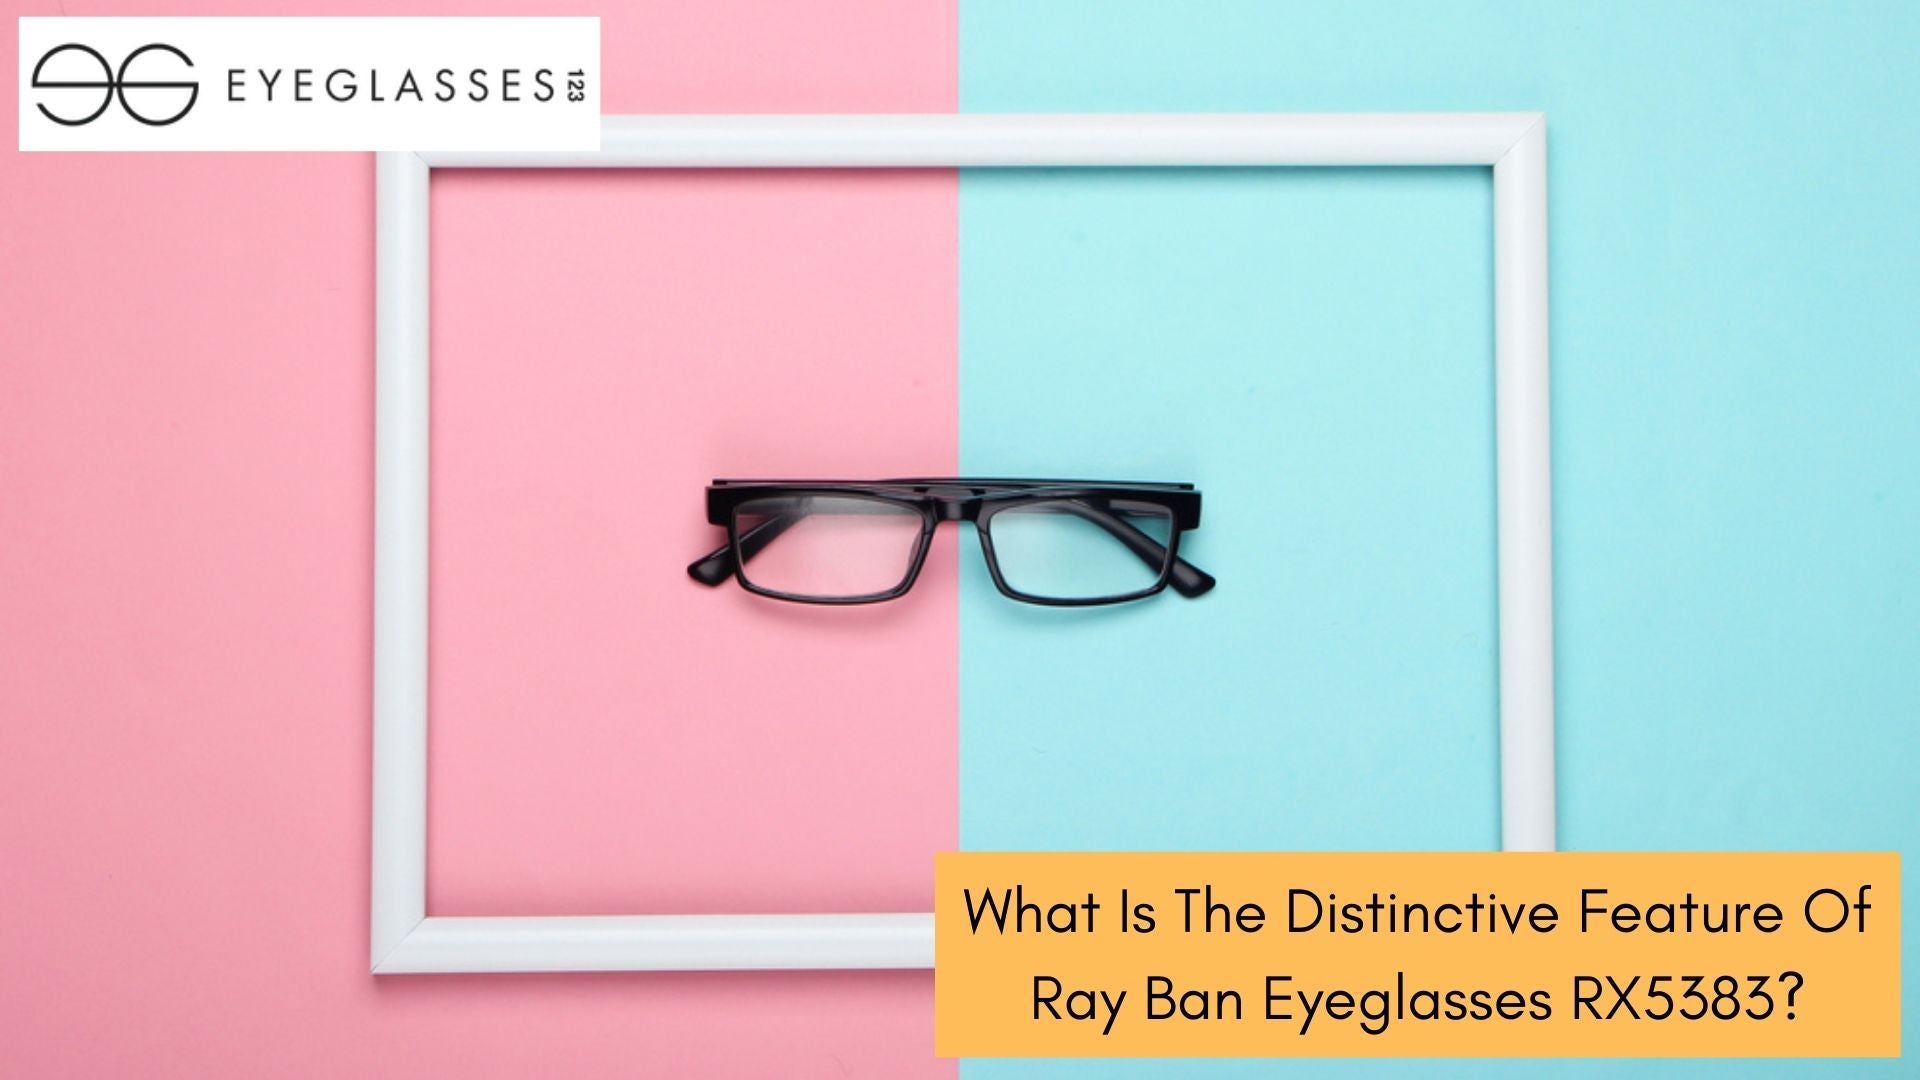 What Is The Distinctive Feature Of Ray Ban Eyeglasses RX5383?